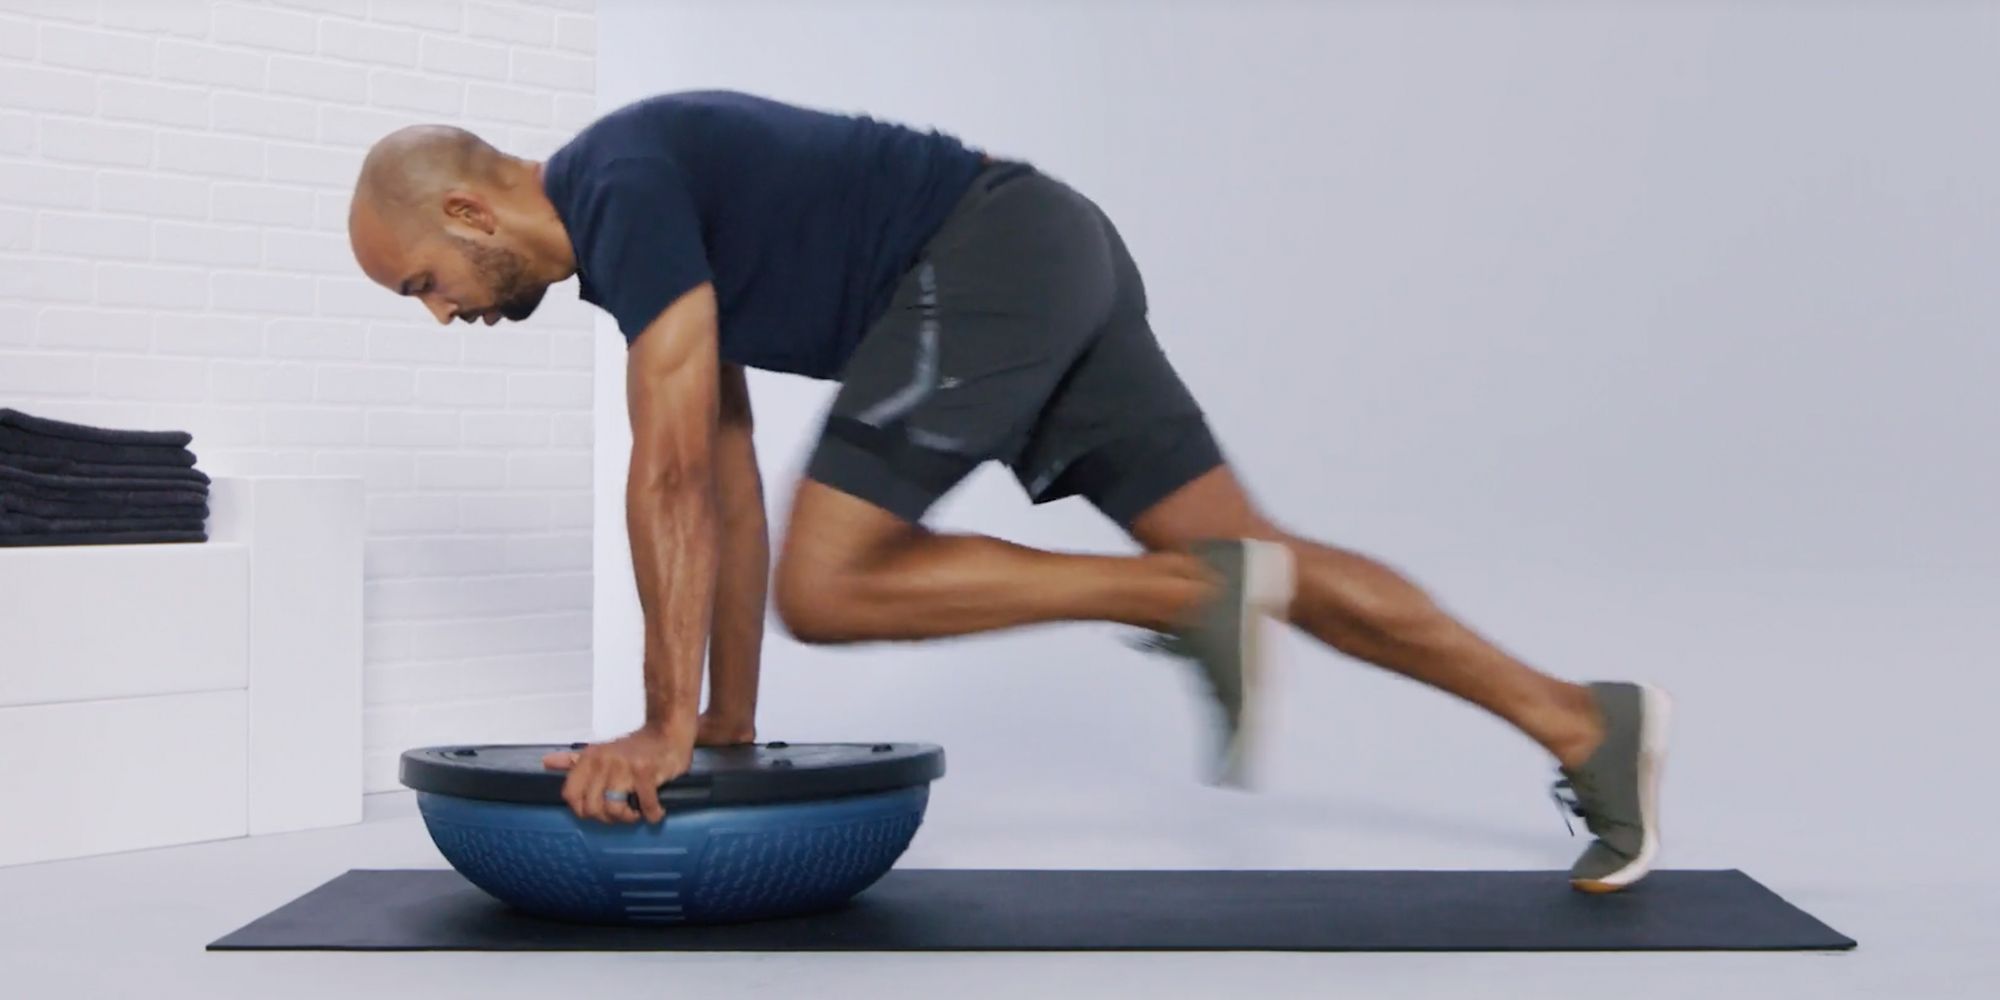 7 Bosu Ball Exercises to Maximize Your Balance and Stability